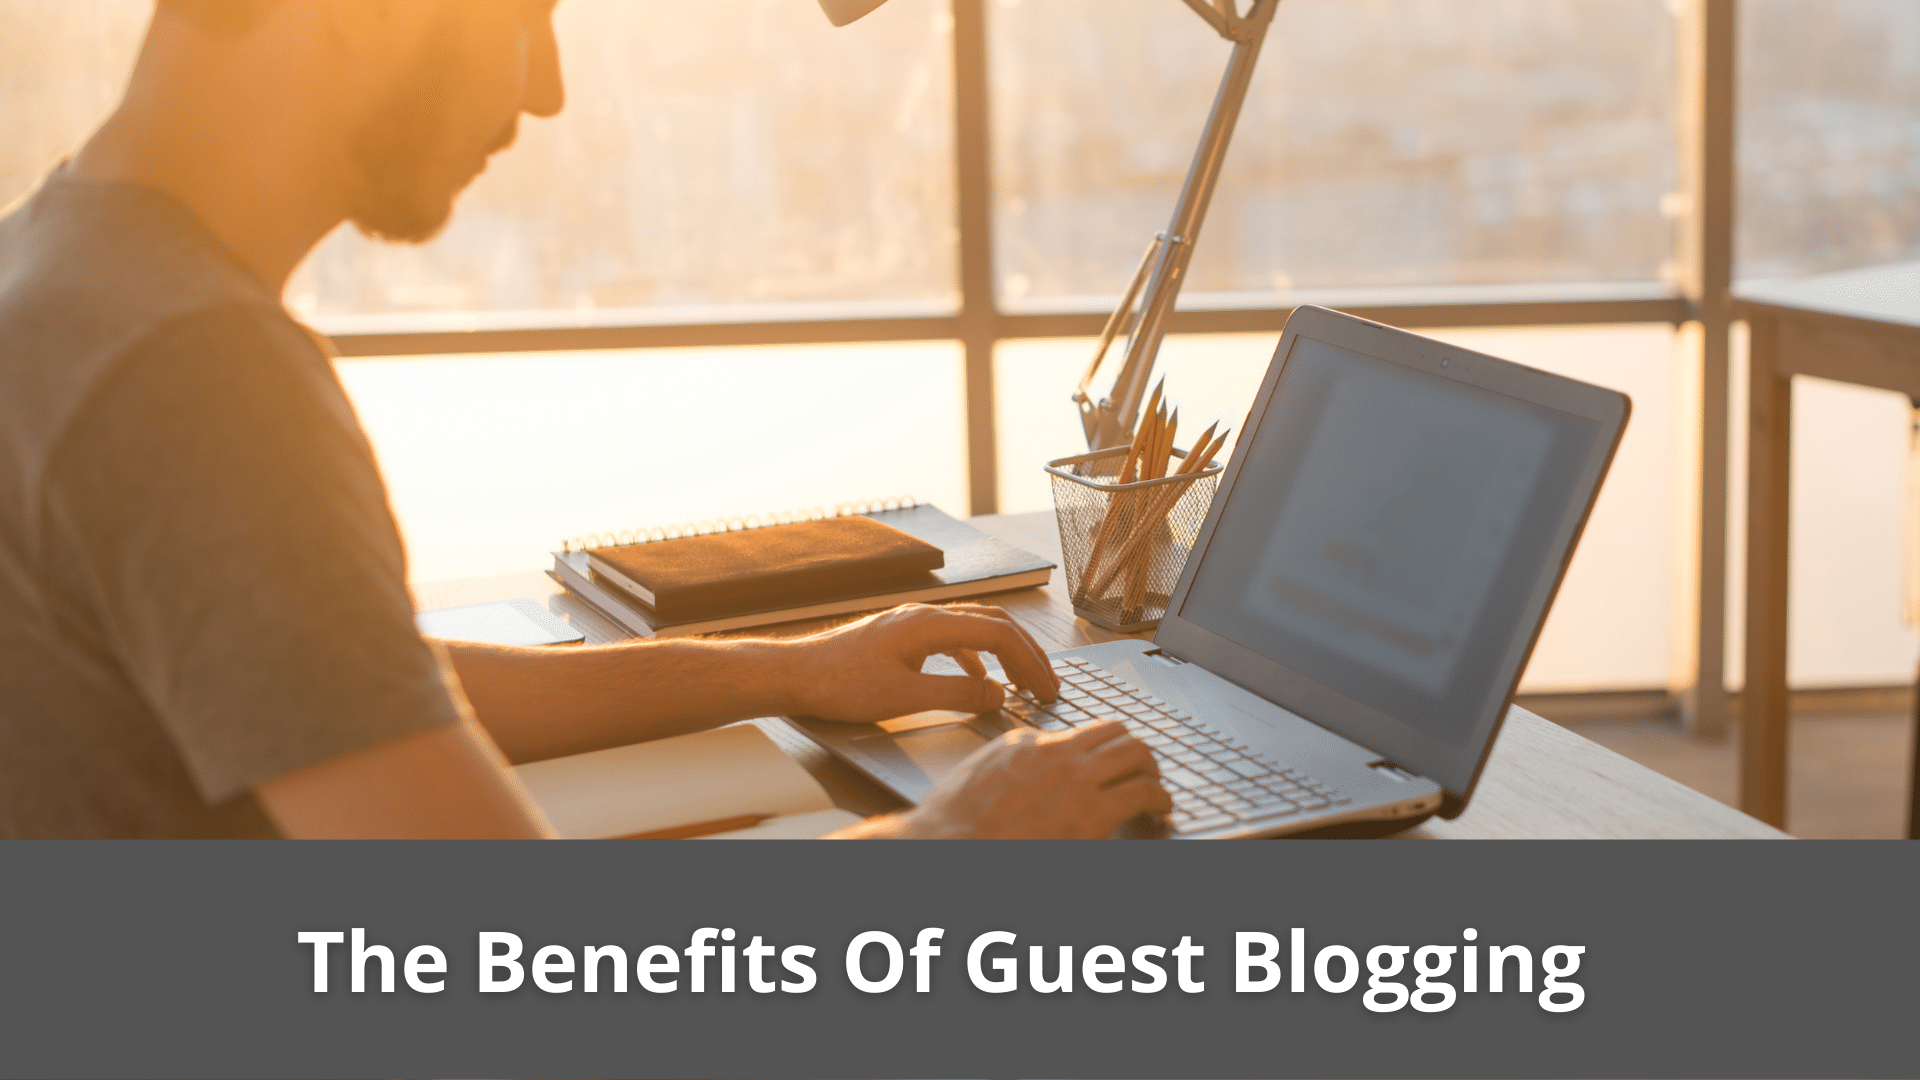  Guest Blogging: How It Can Help You Build Your Domain Authority